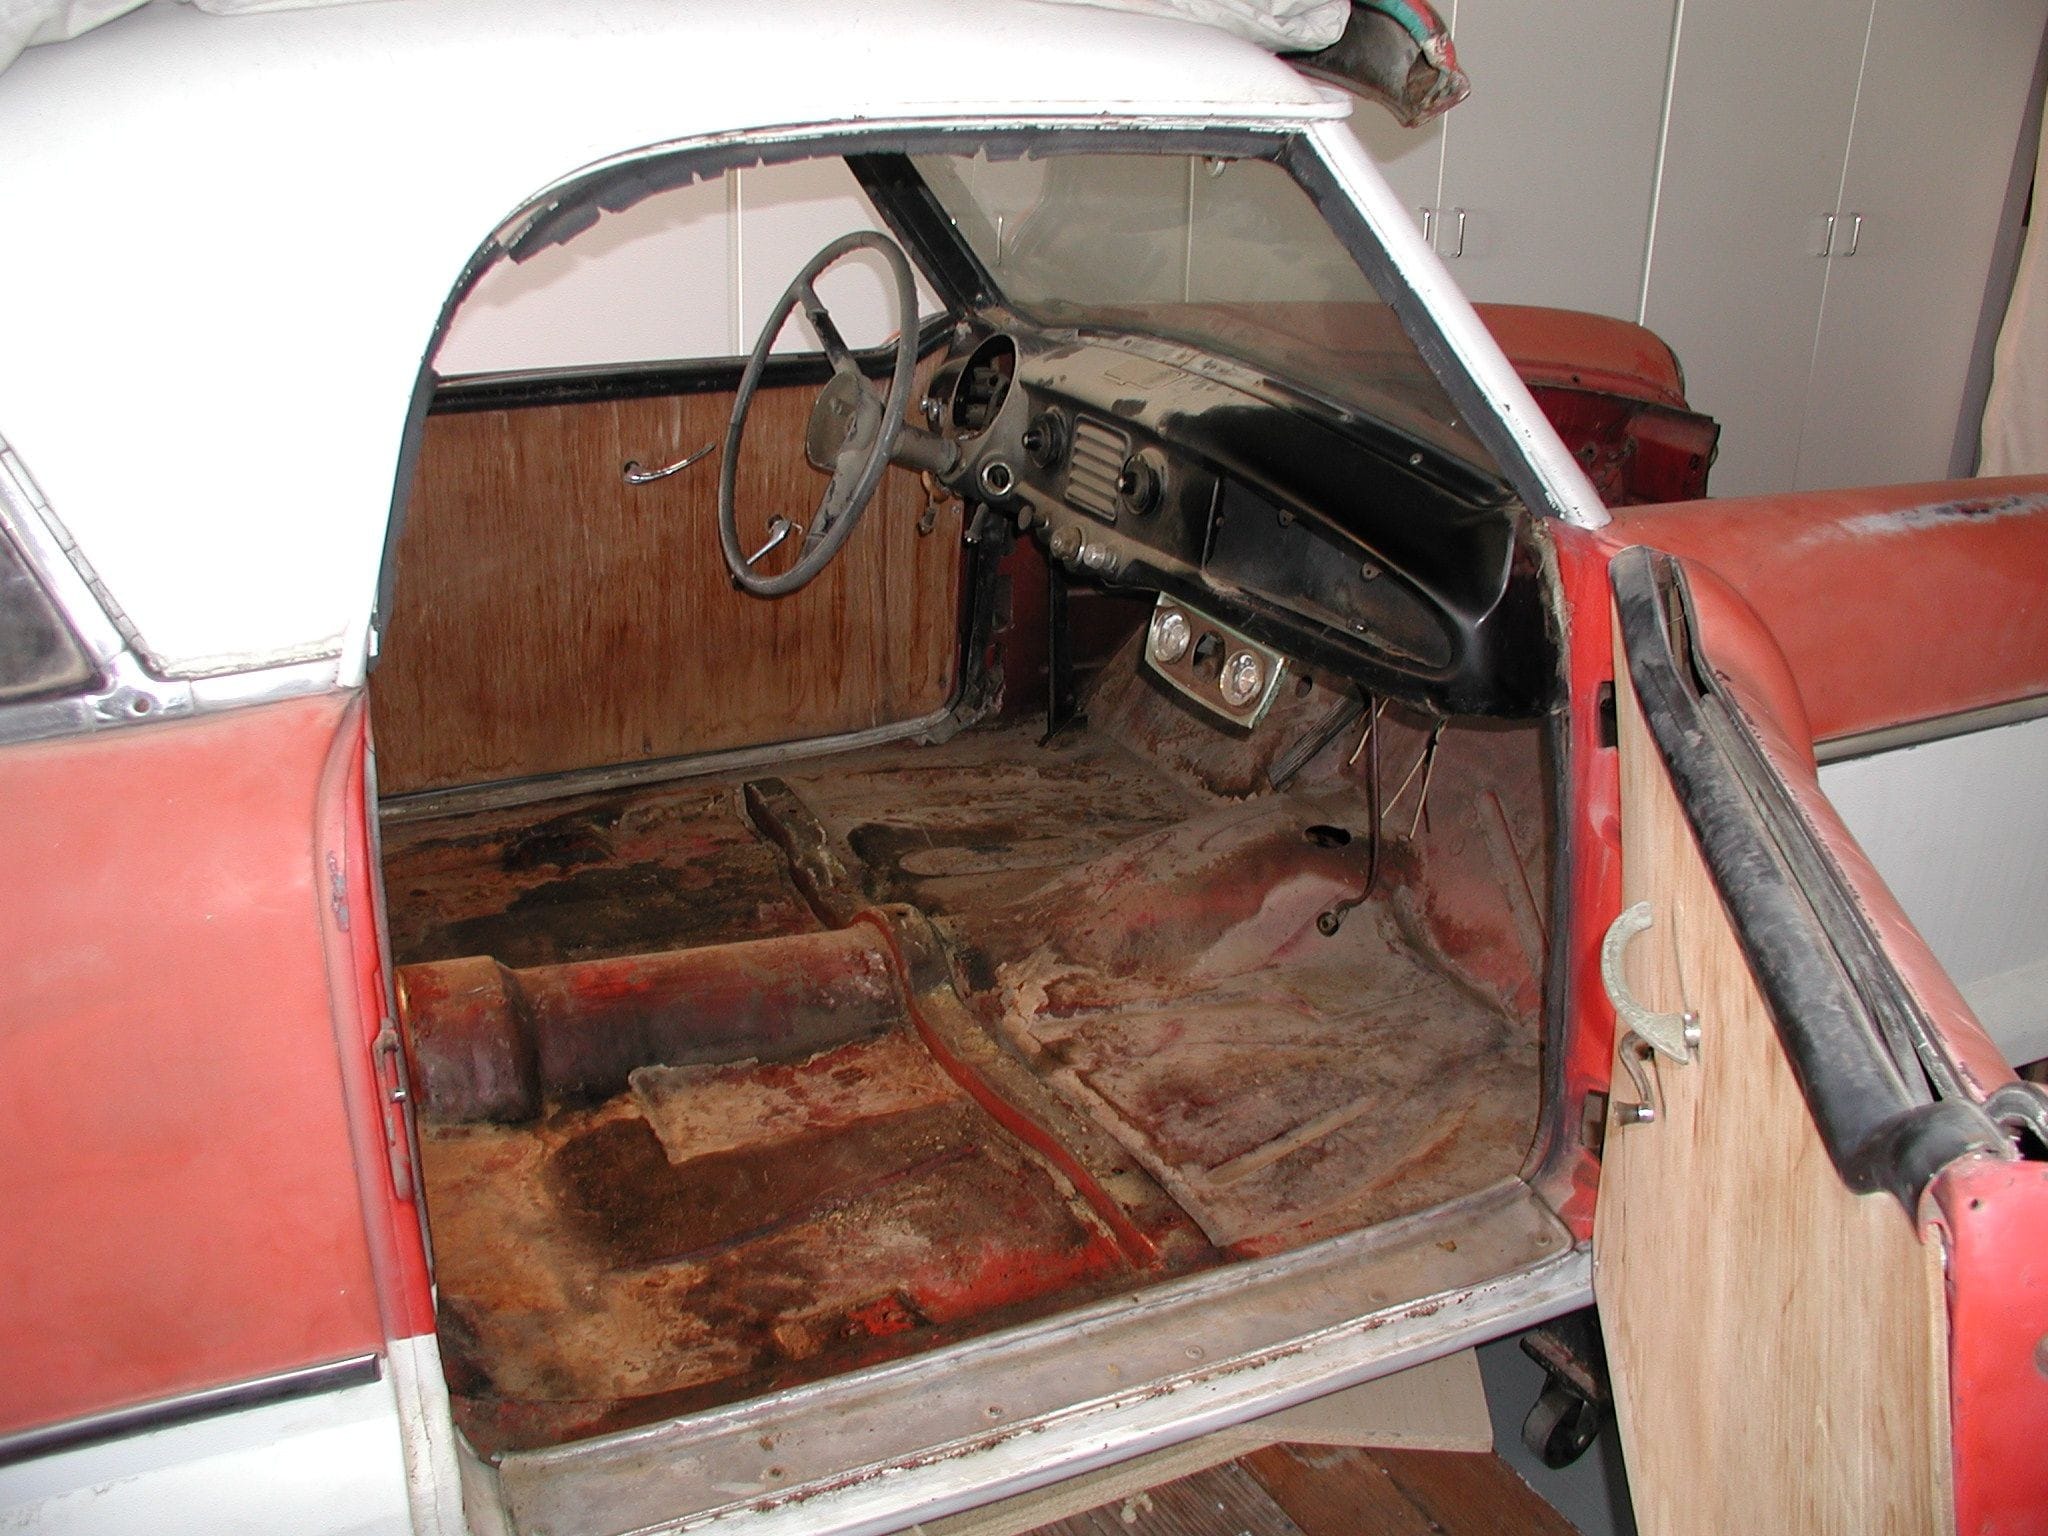 Inside of the Old Car